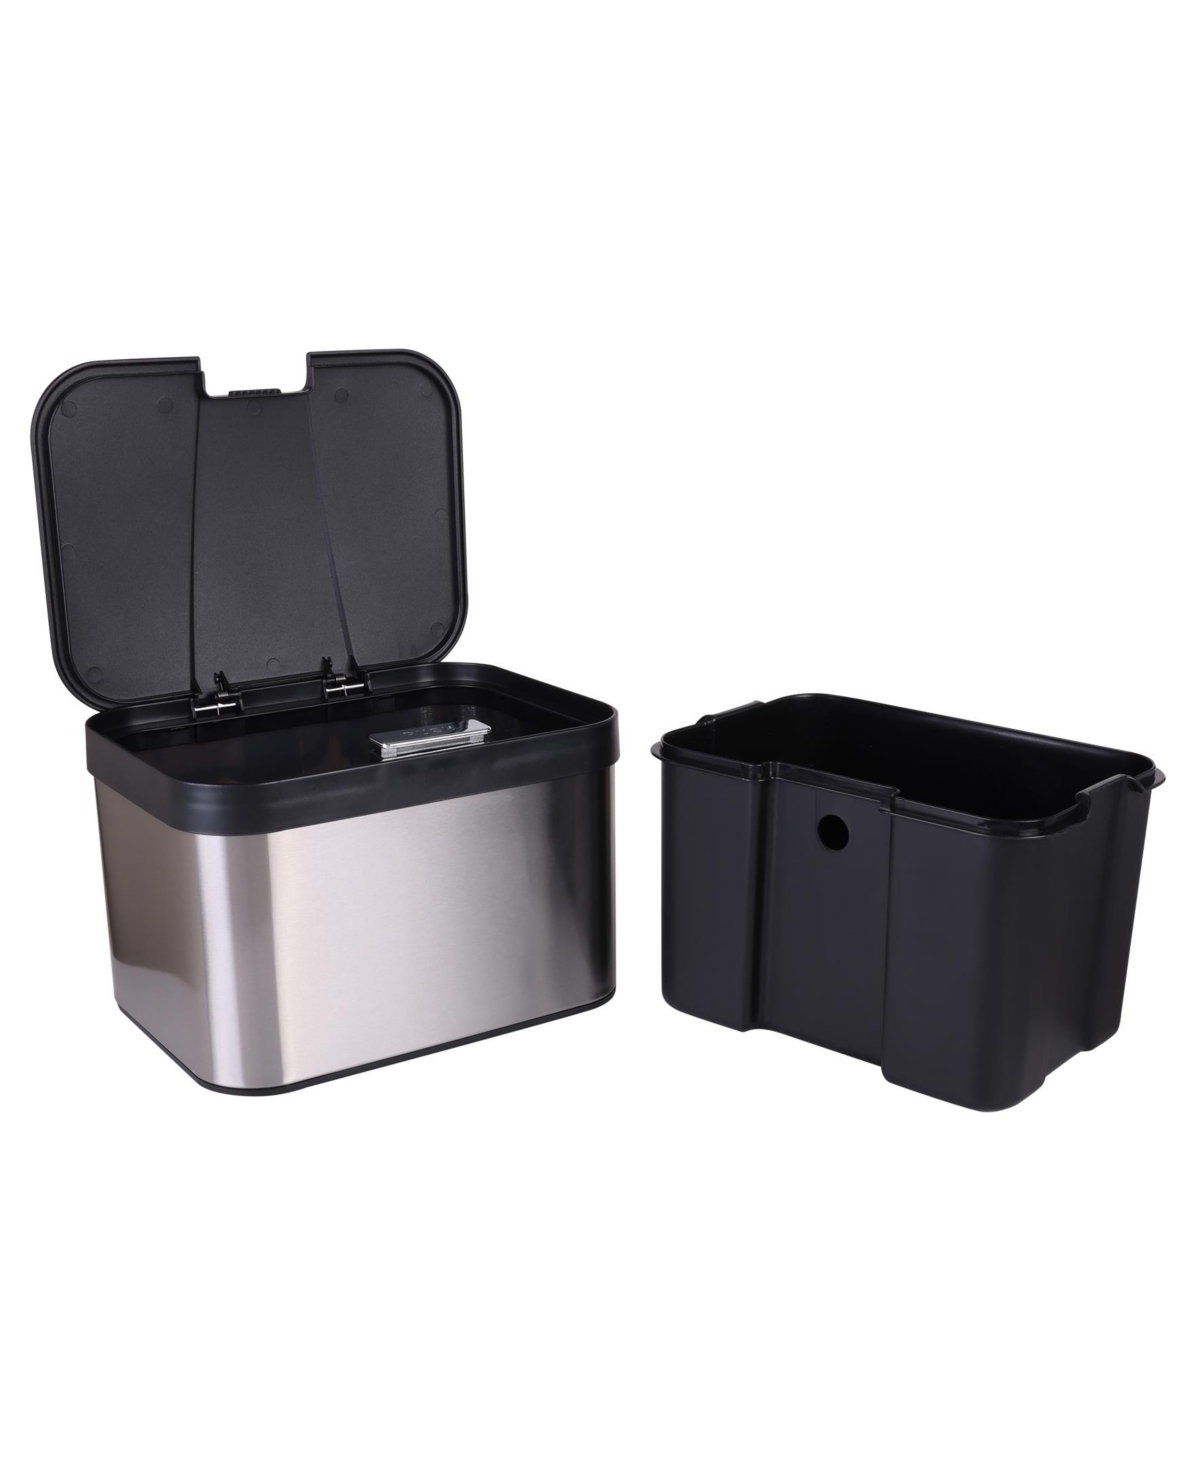 Shop Organize It All Stainless Steel Compost Bin Set With Biodegradable Bags, Sink Organizer & Scrub Brush